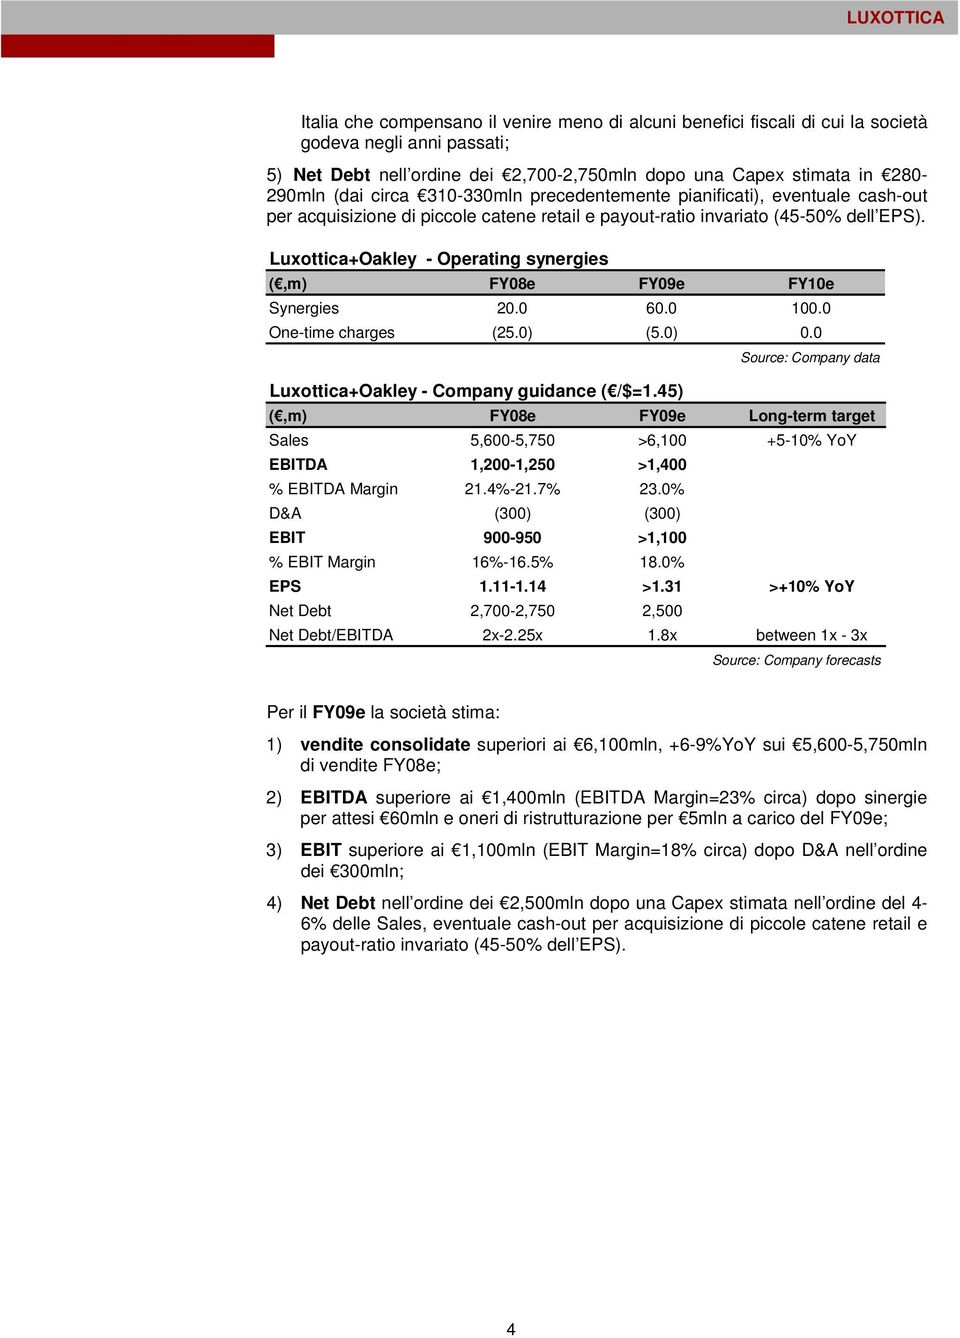 Luxottica+Oakley - Operating synergies (,m) FY08e FY09e FY10e Synergies 20.0 60.0 100.0 One-time charges (25.0) (5.0) 0.0 Source: Company data Luxottica+Oakley - Company guidance ( /$=1.